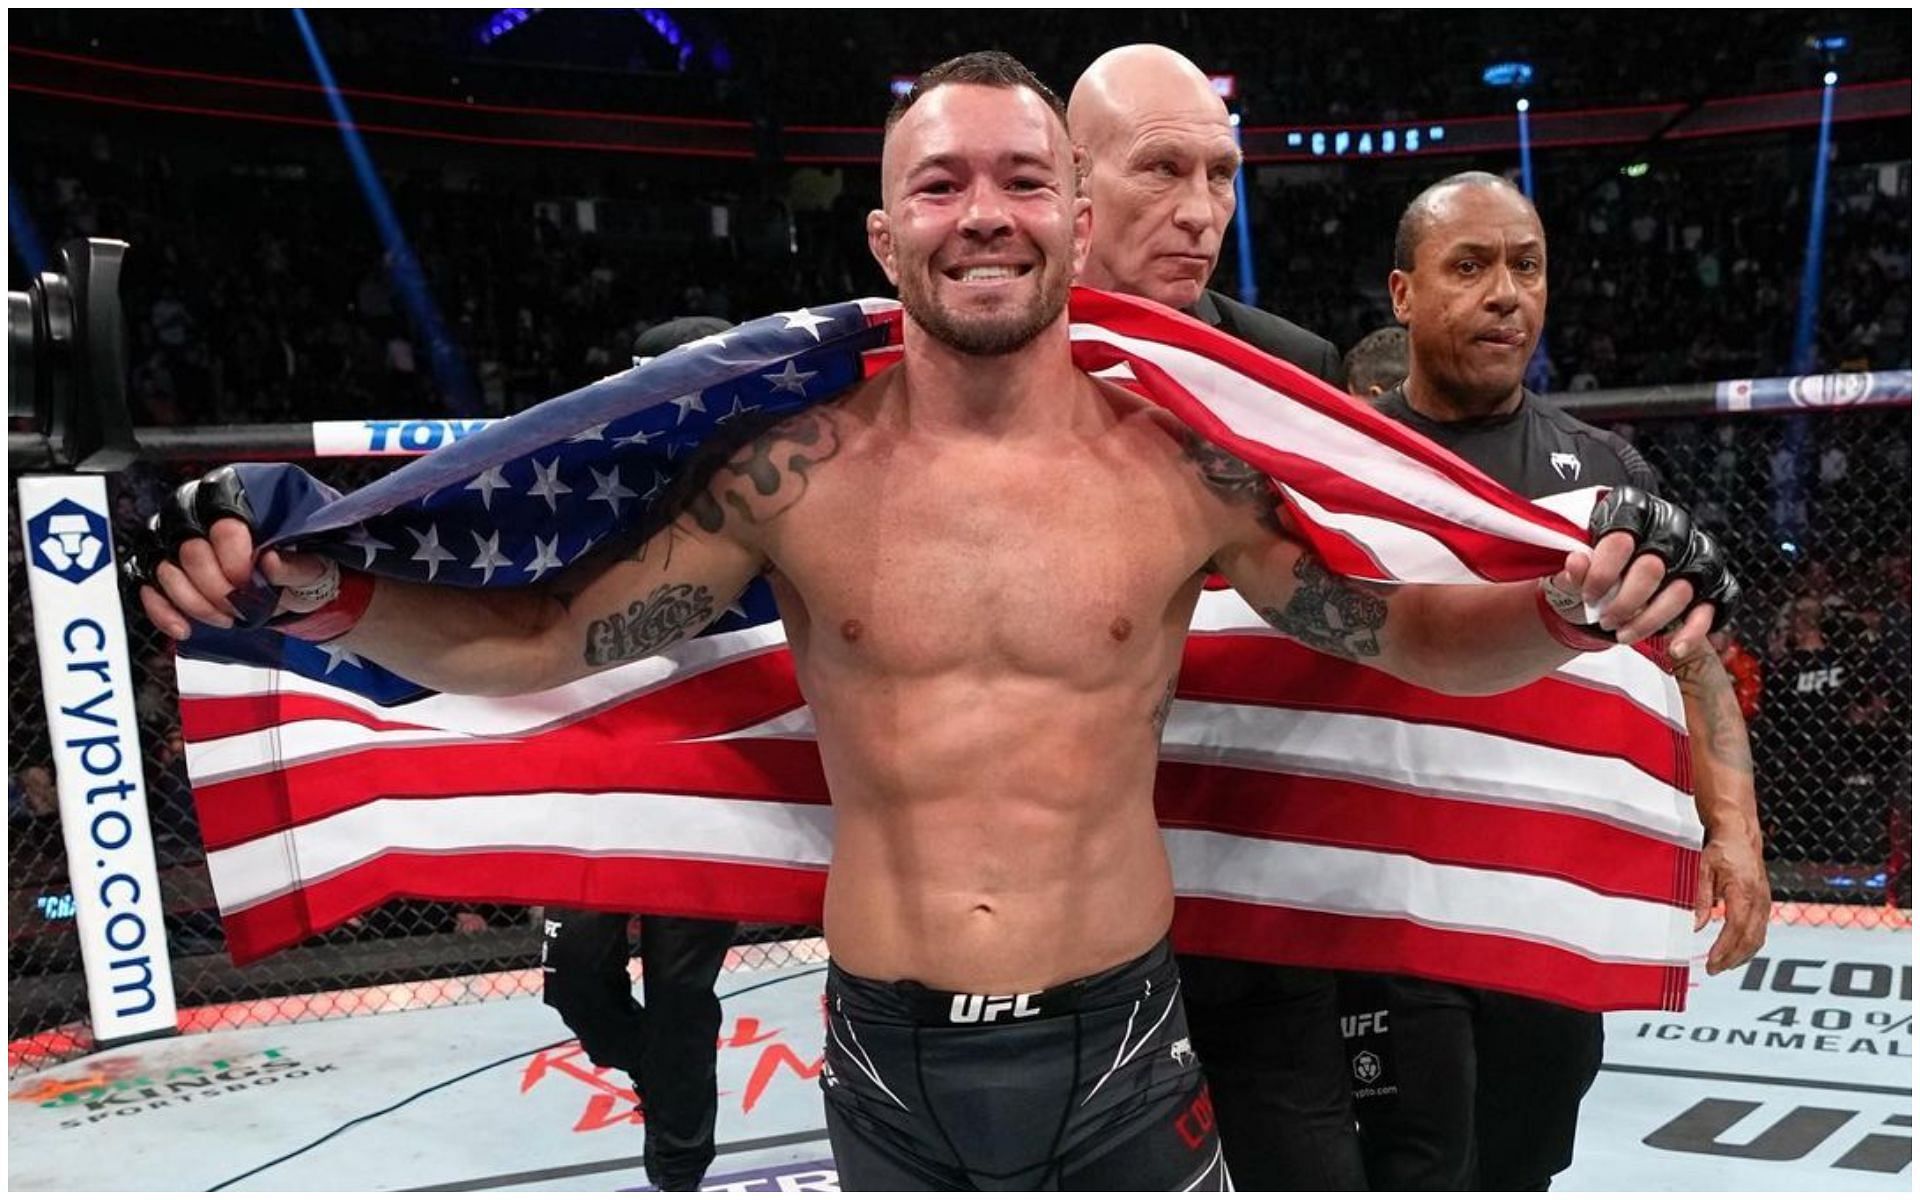 UFC weltwerweight contender Colby Covington 